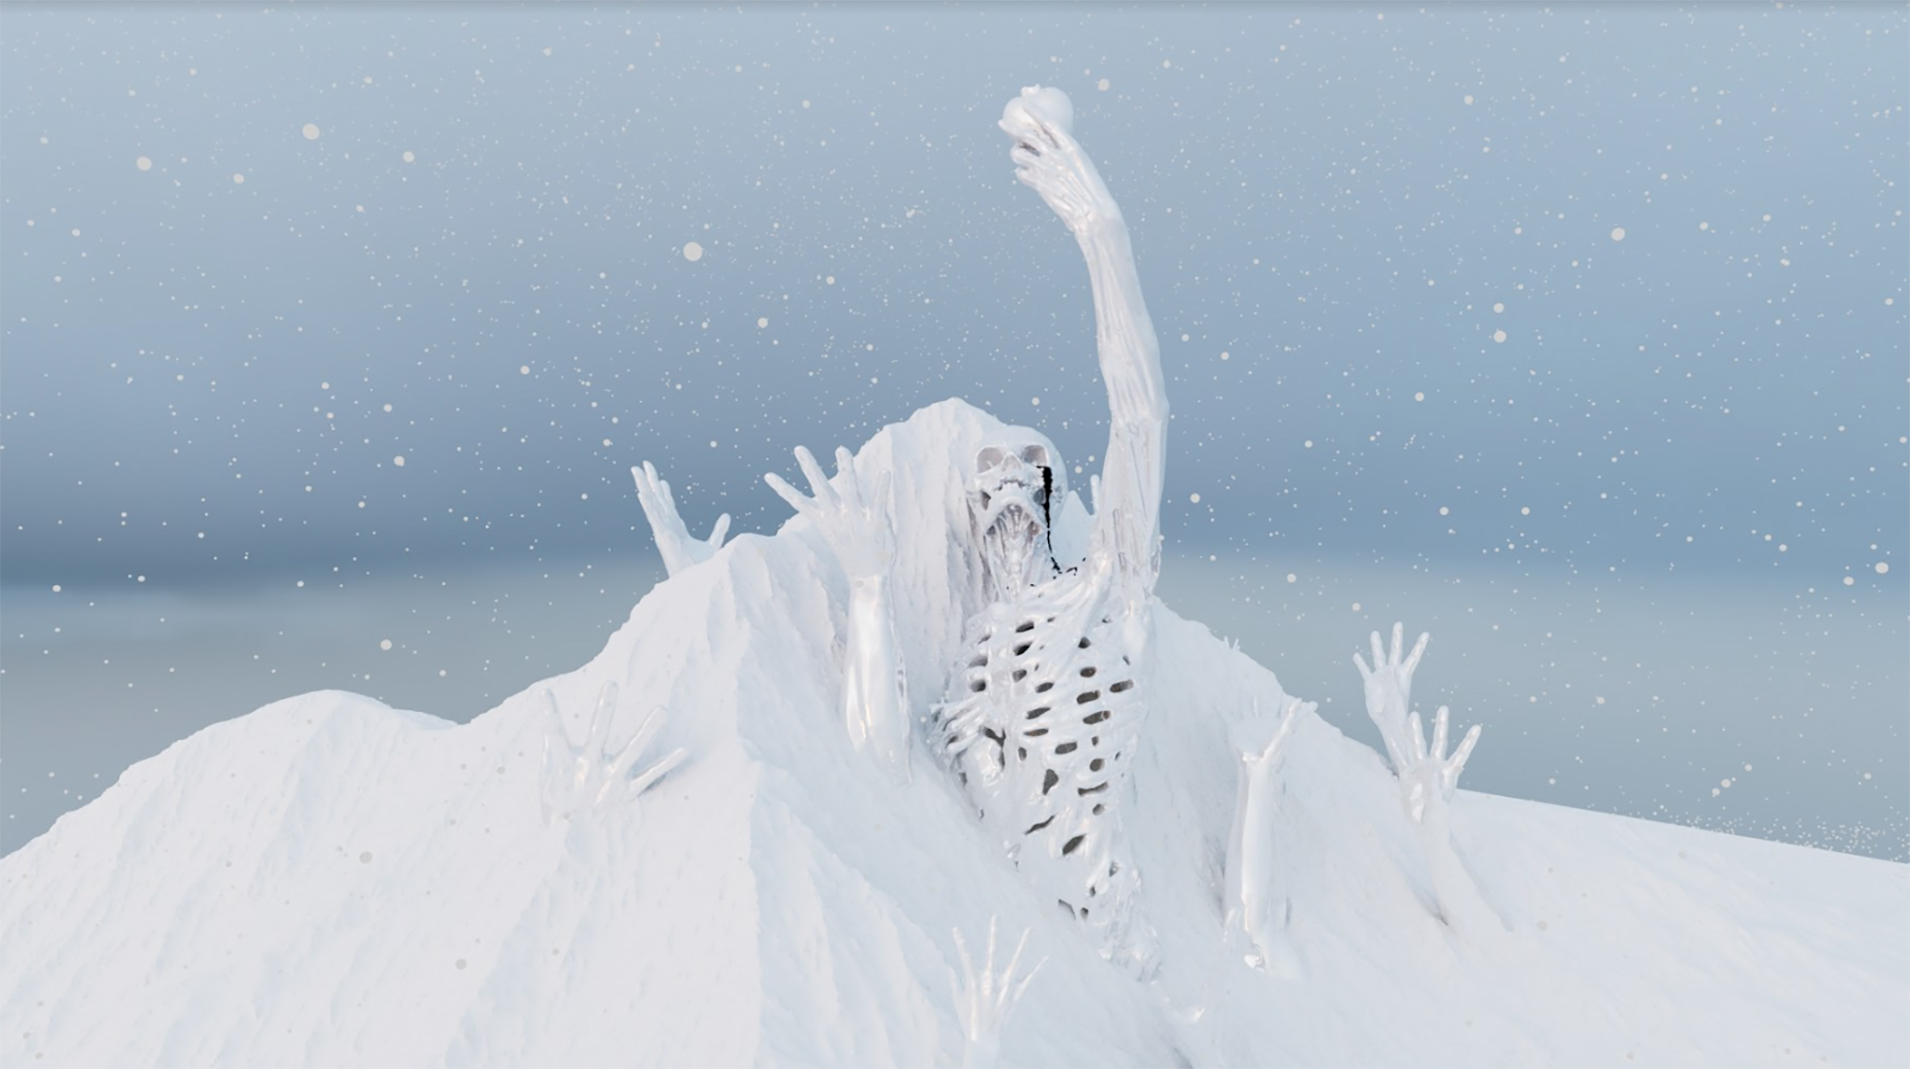 Still from a digital animation showing a skeletal figure in an abstracted snowy landscape